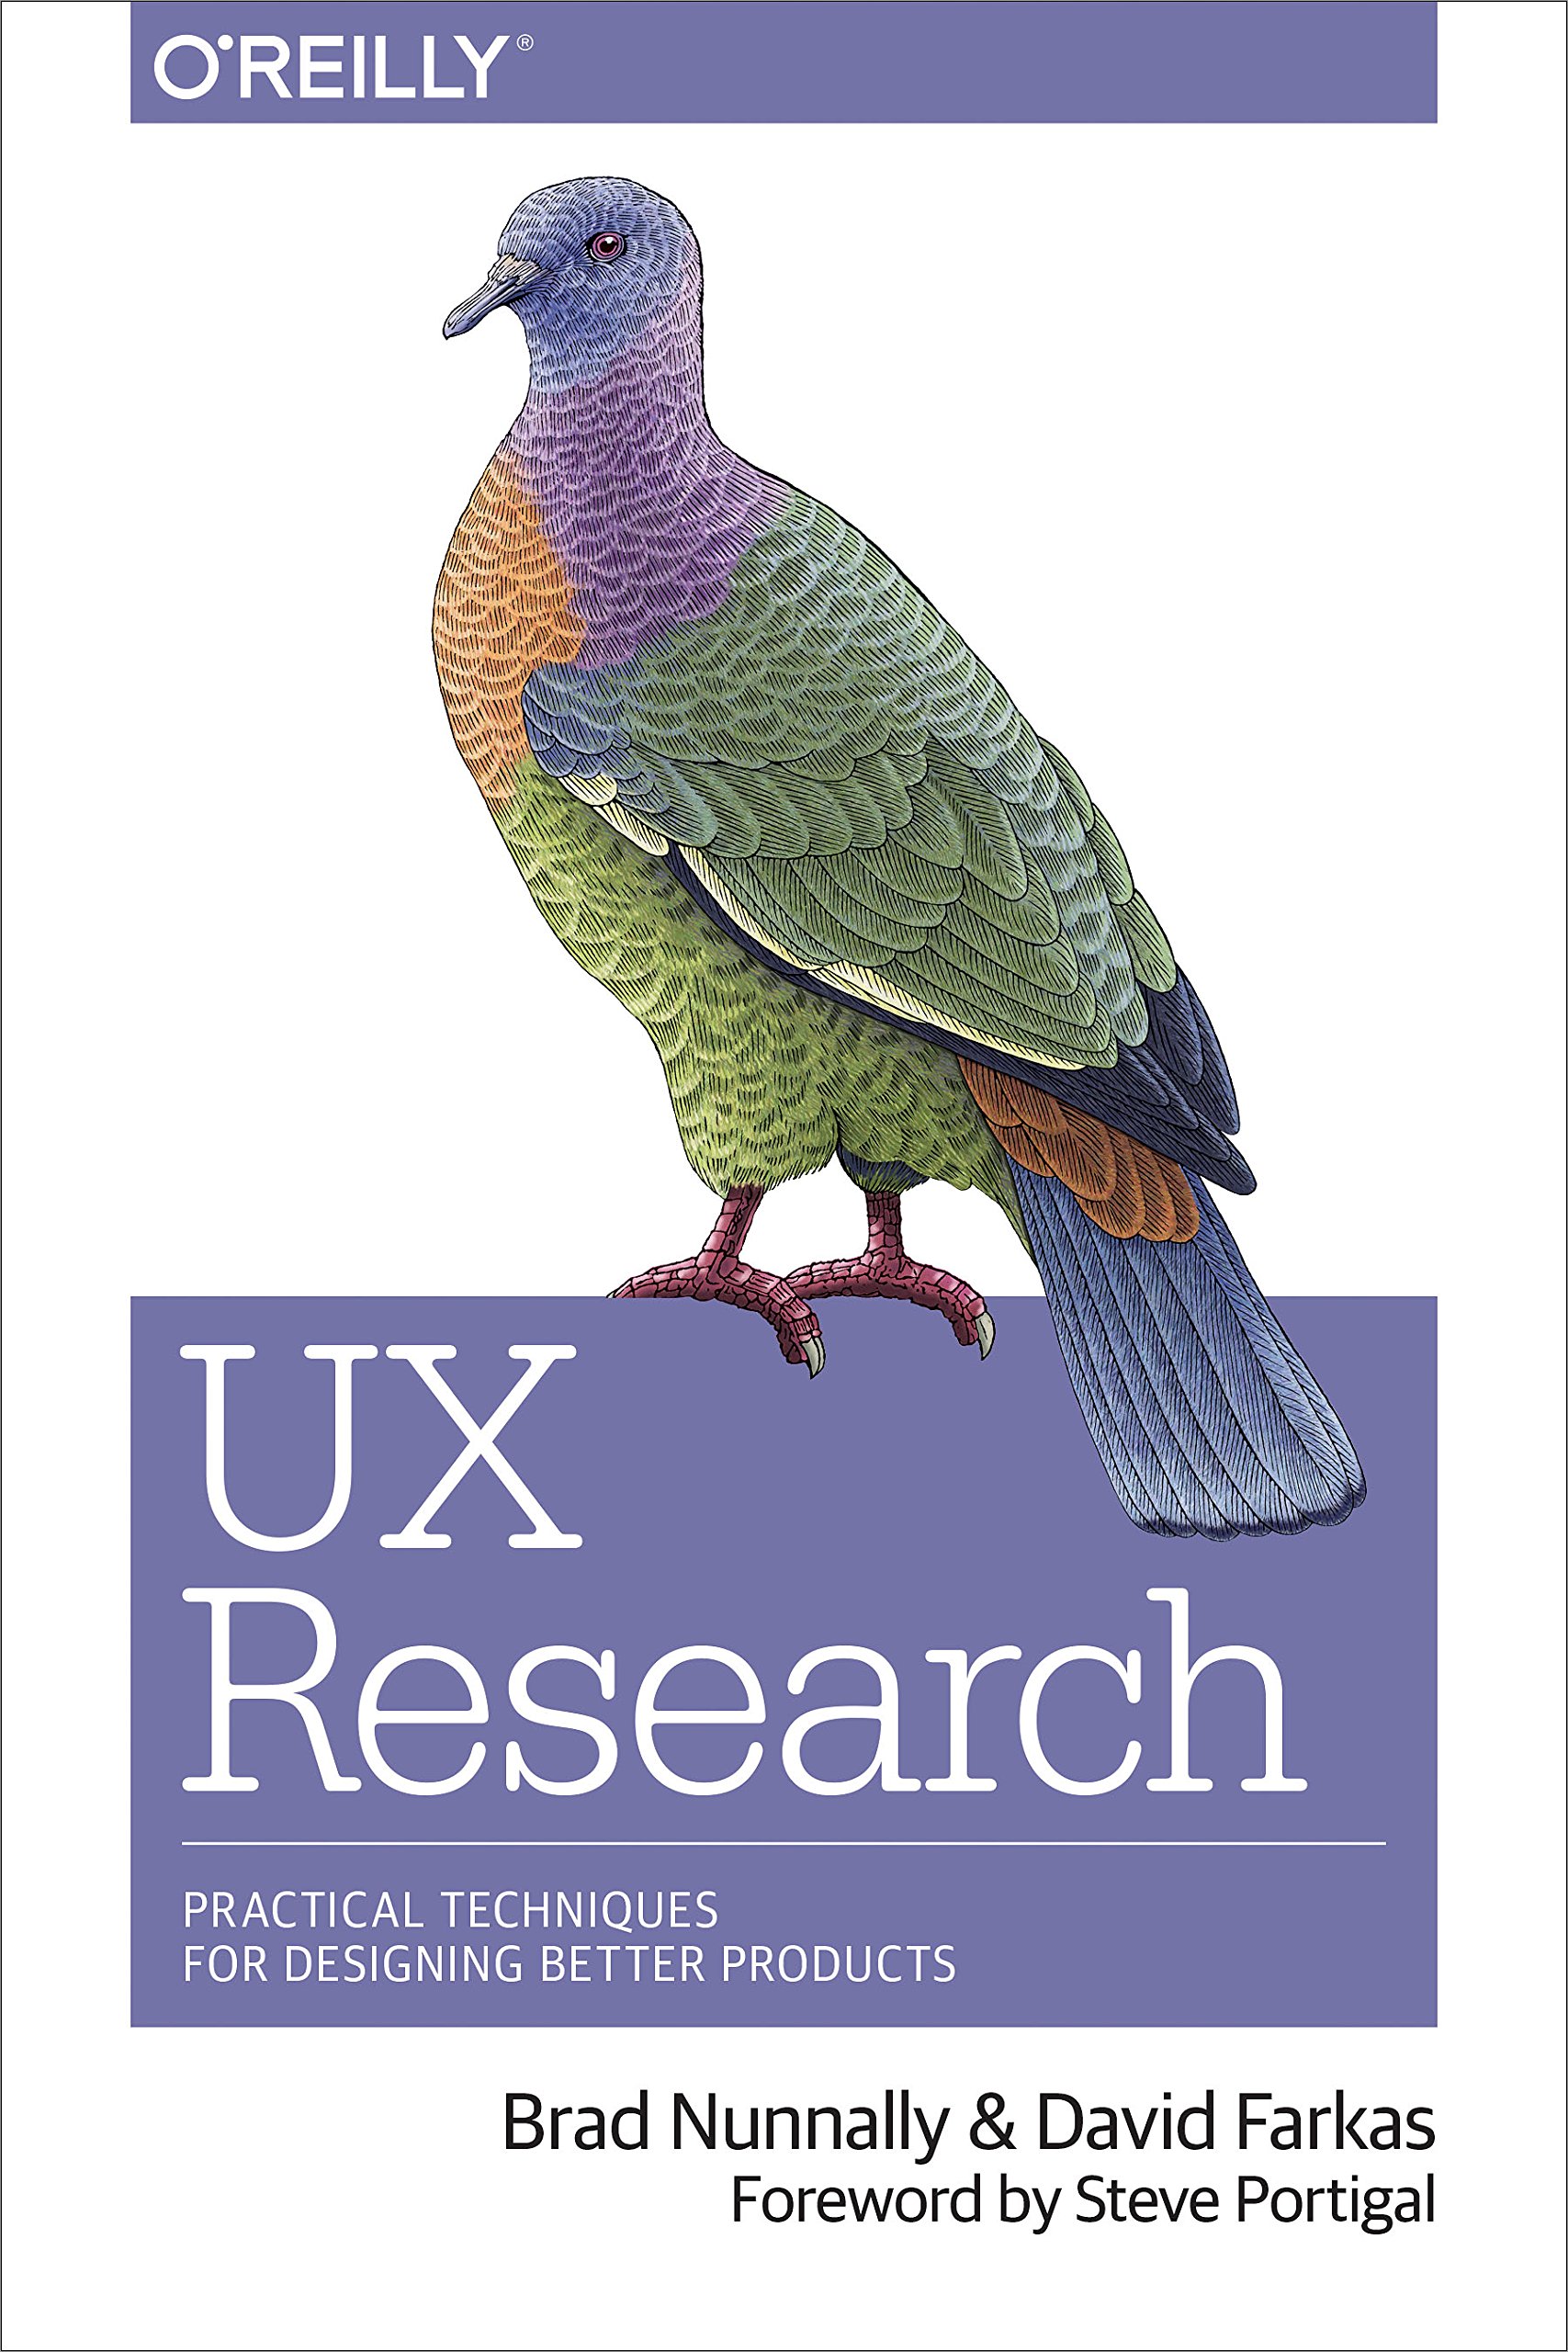 UX Research : Practical Techniques for Designing Better Products (ใหม่) หนังสือภาษาอังกฤษพร้อมส่ง